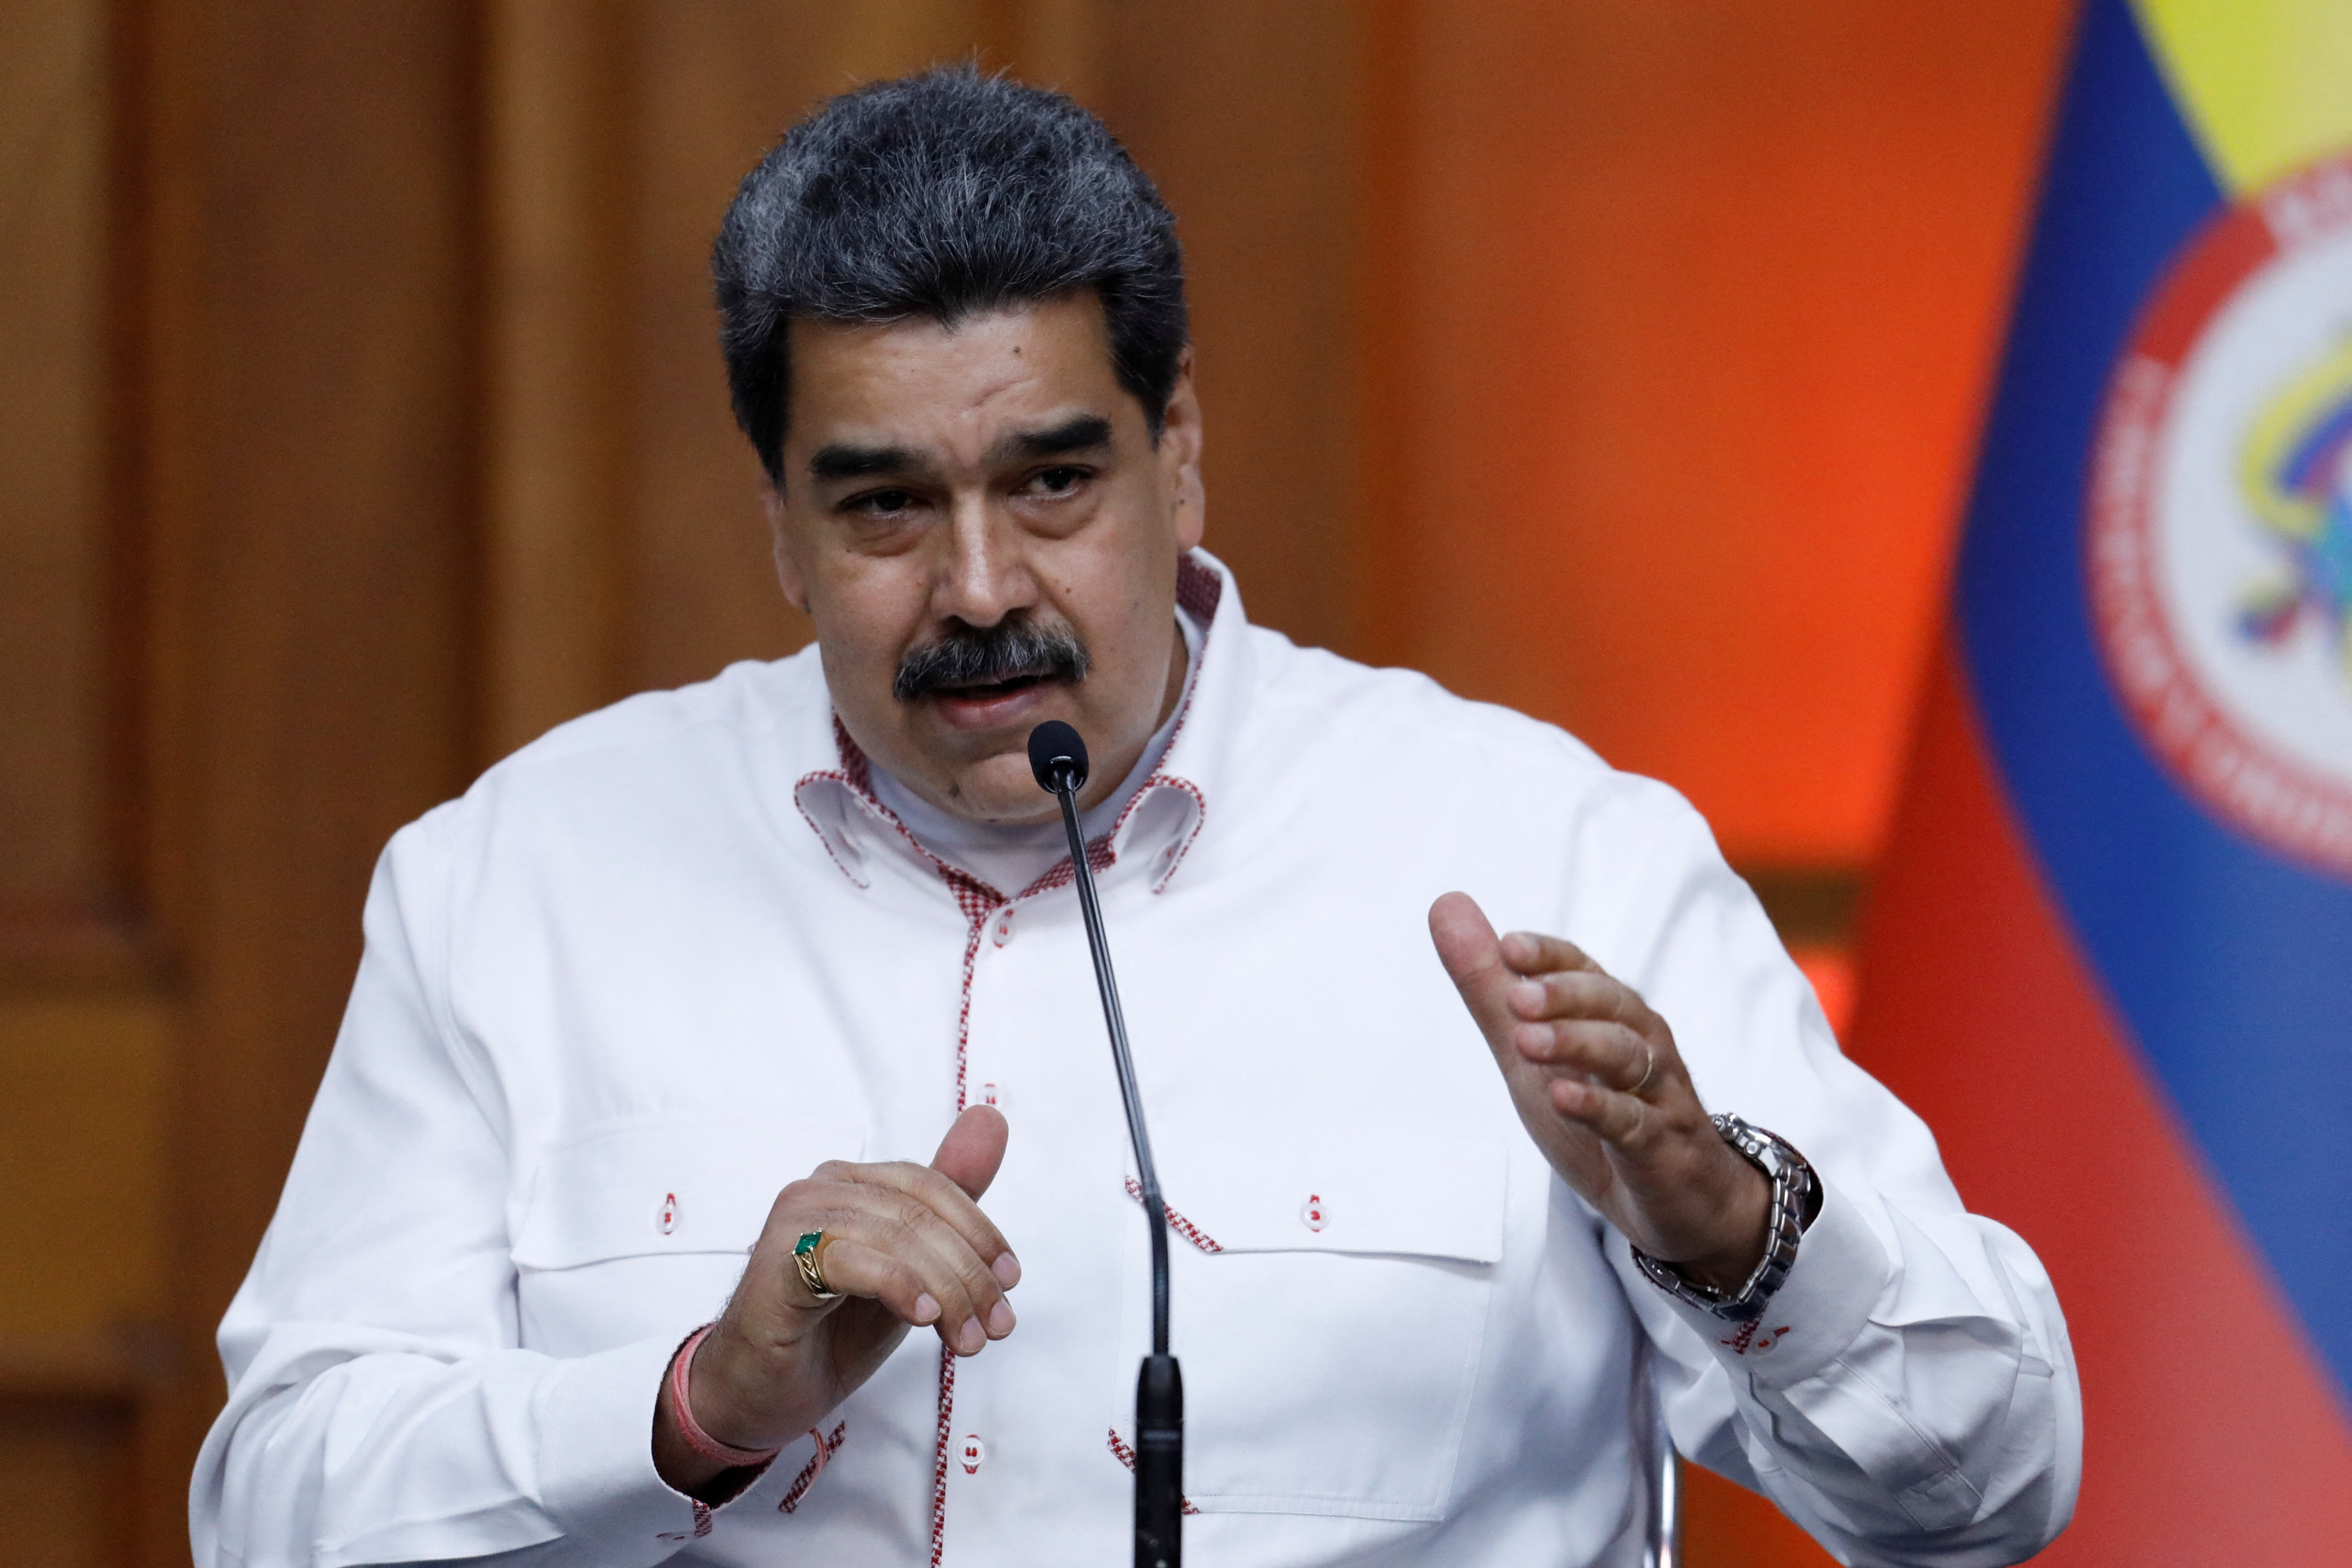 Venezuela's President Maduro meets with Colombia's President Petro in Caracas